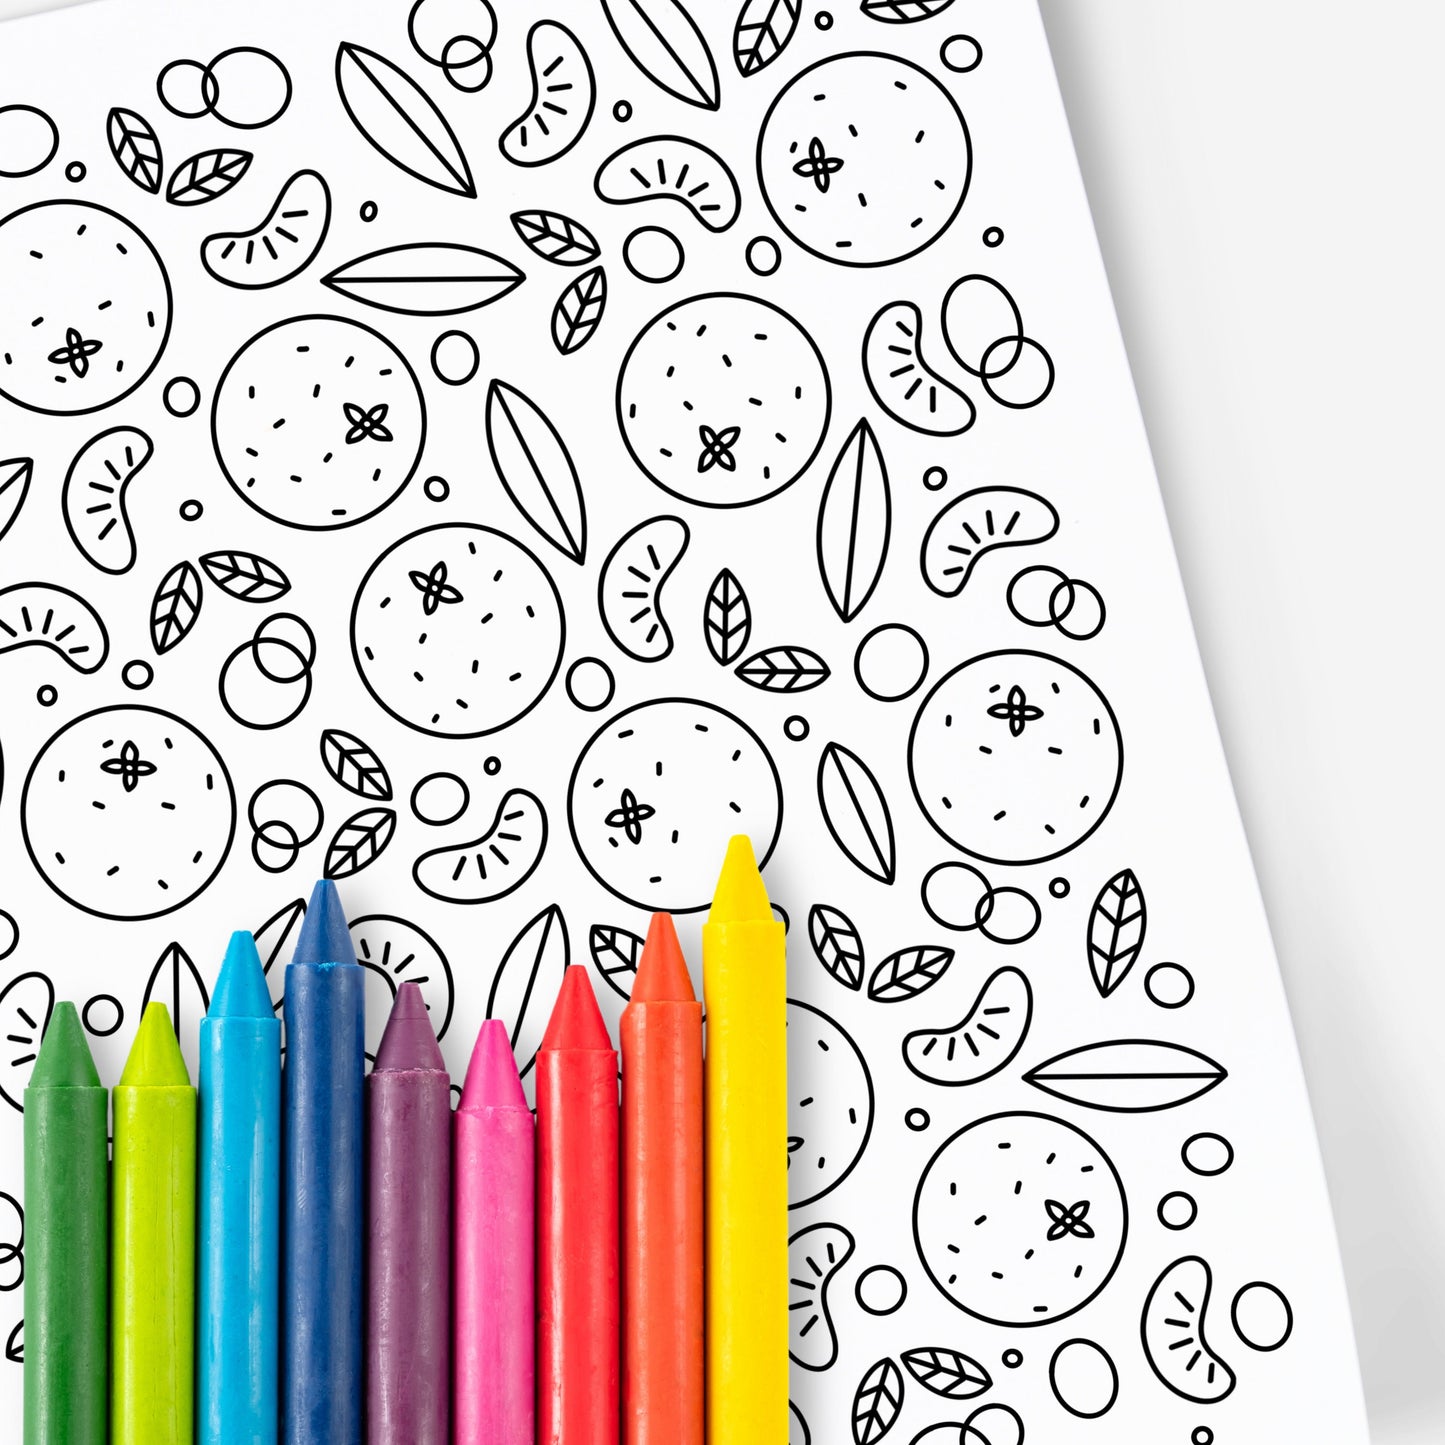 10 Pk Foodie Printable Coloring Book 10Pk Coloring Pages | Hand-Drawn Digital Coloring Book | Adult Zen Calming Color Activity Time